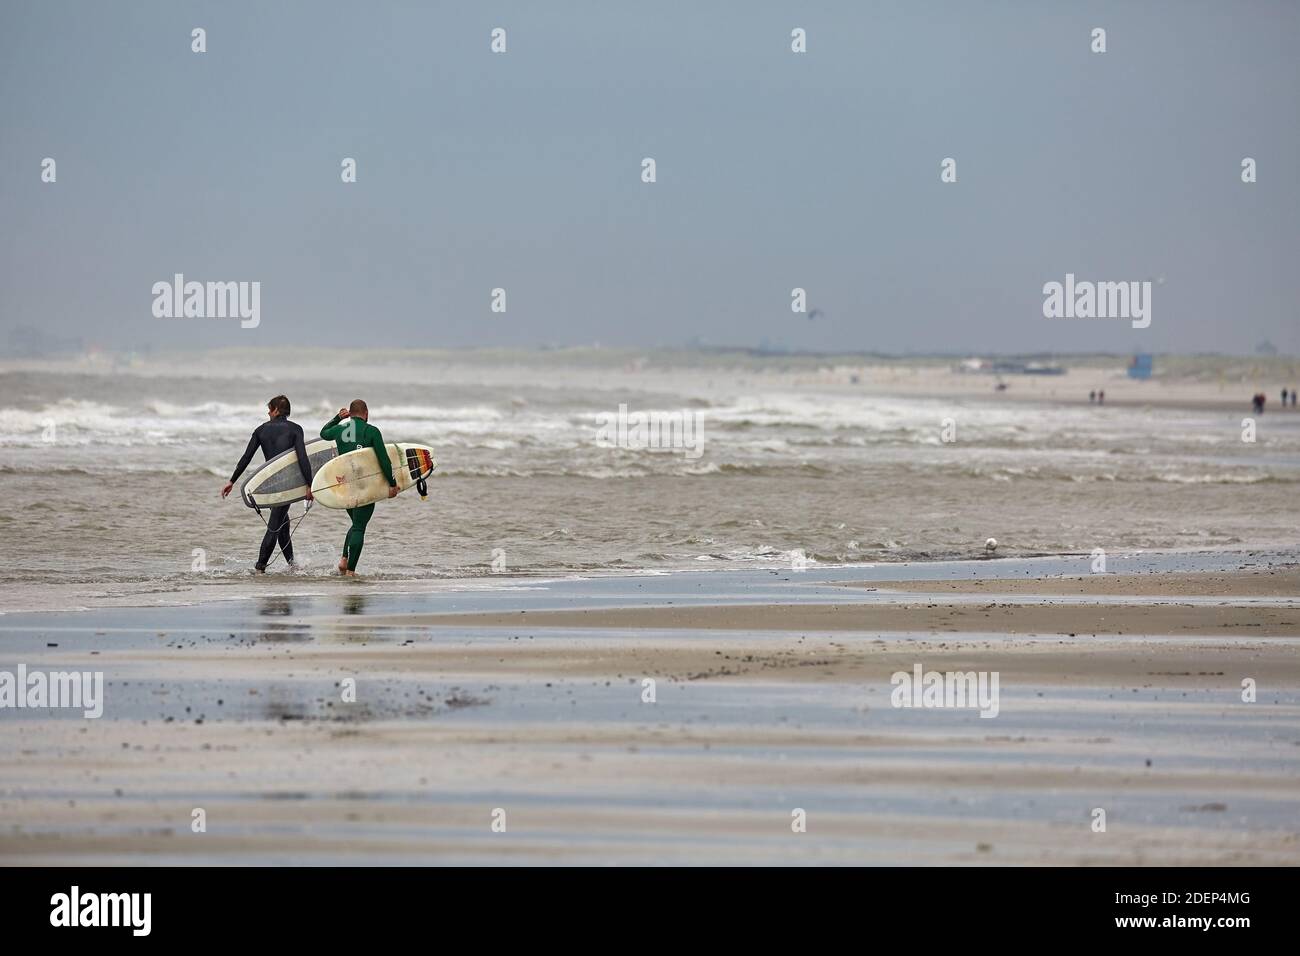 Surfers entering the water in cold windy weather Stock Photo